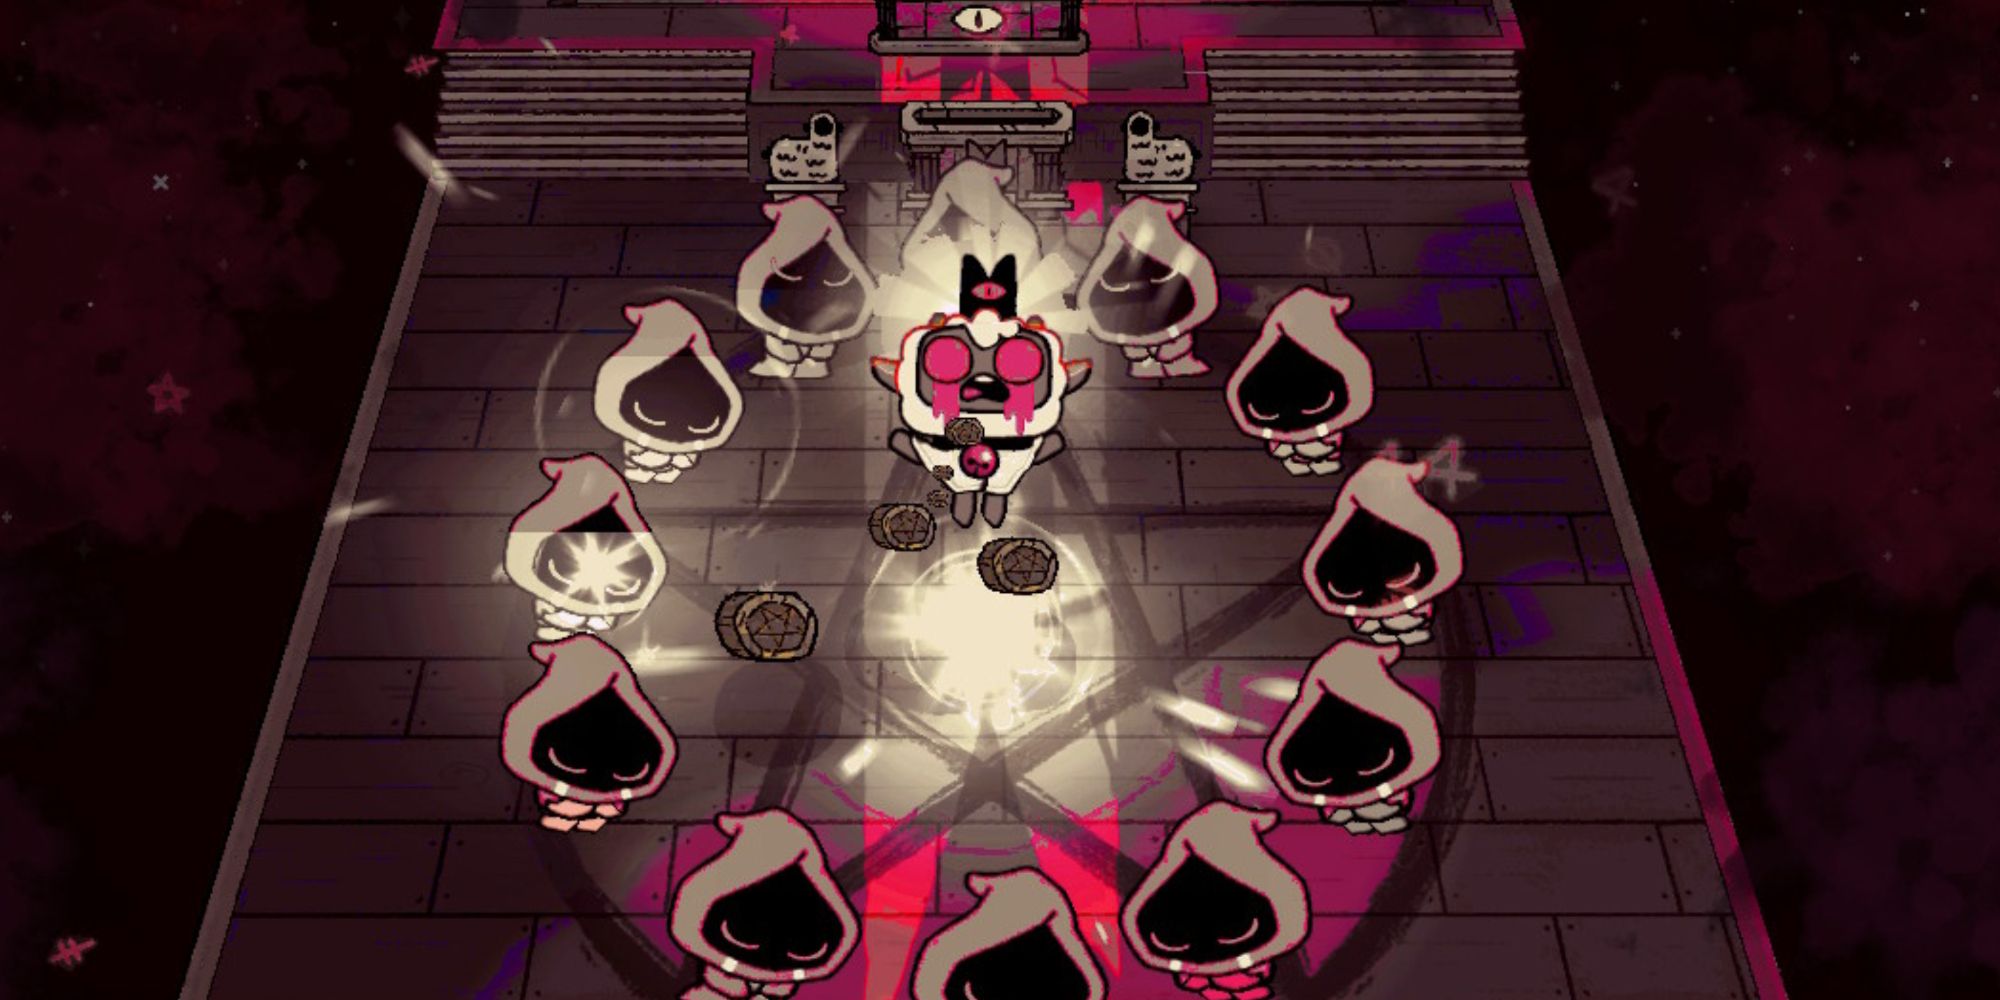 The lamb and his followers perform a ritual in the temple in CUlt Of The Lamb